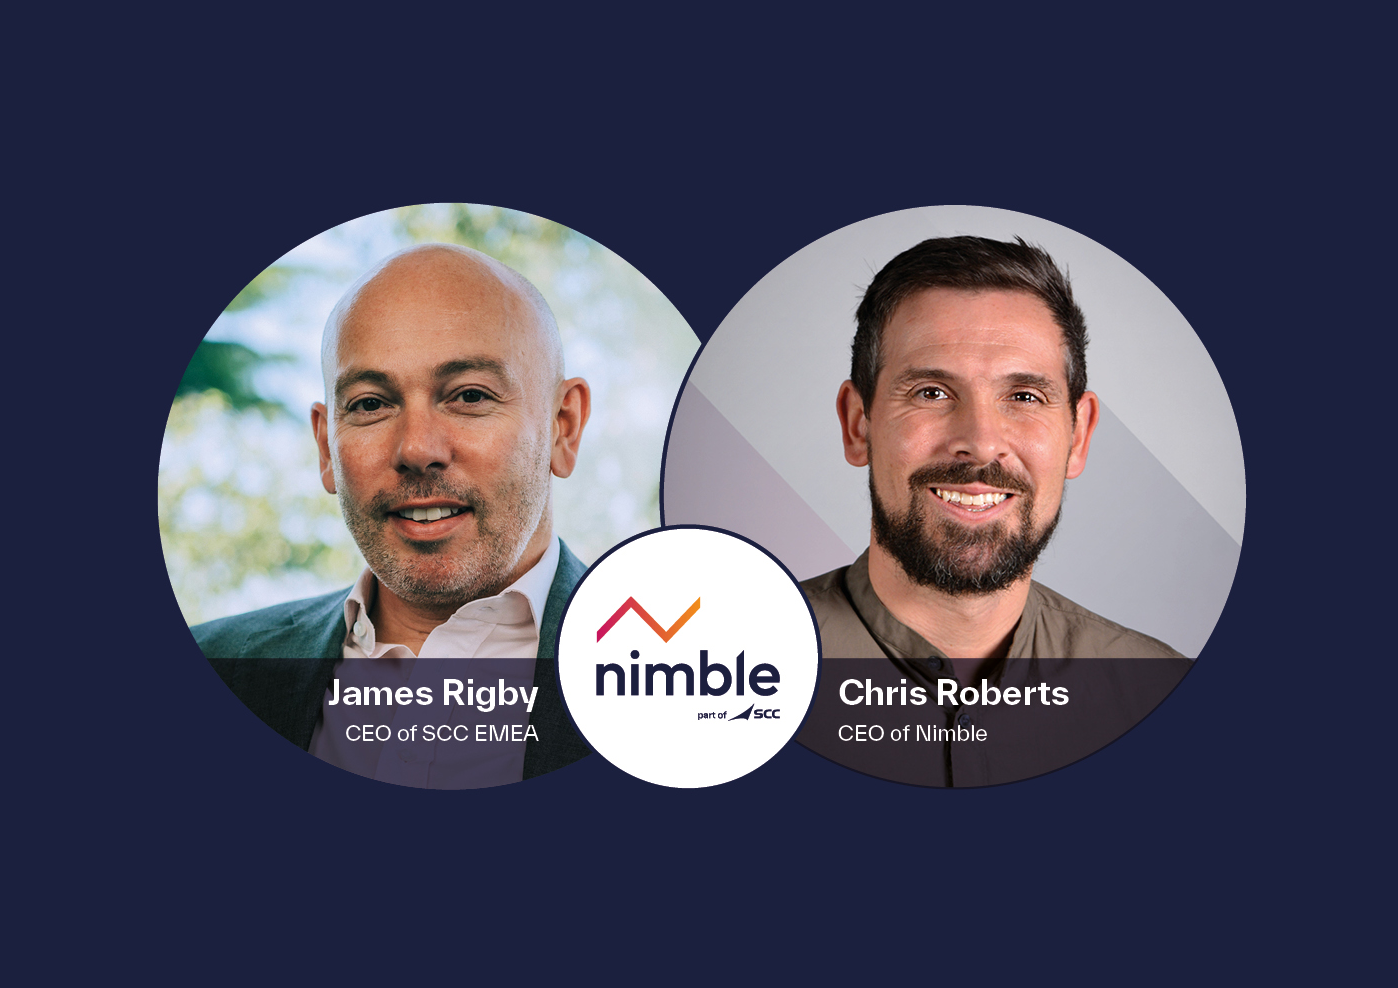 James from SCC and Chris from Nimble